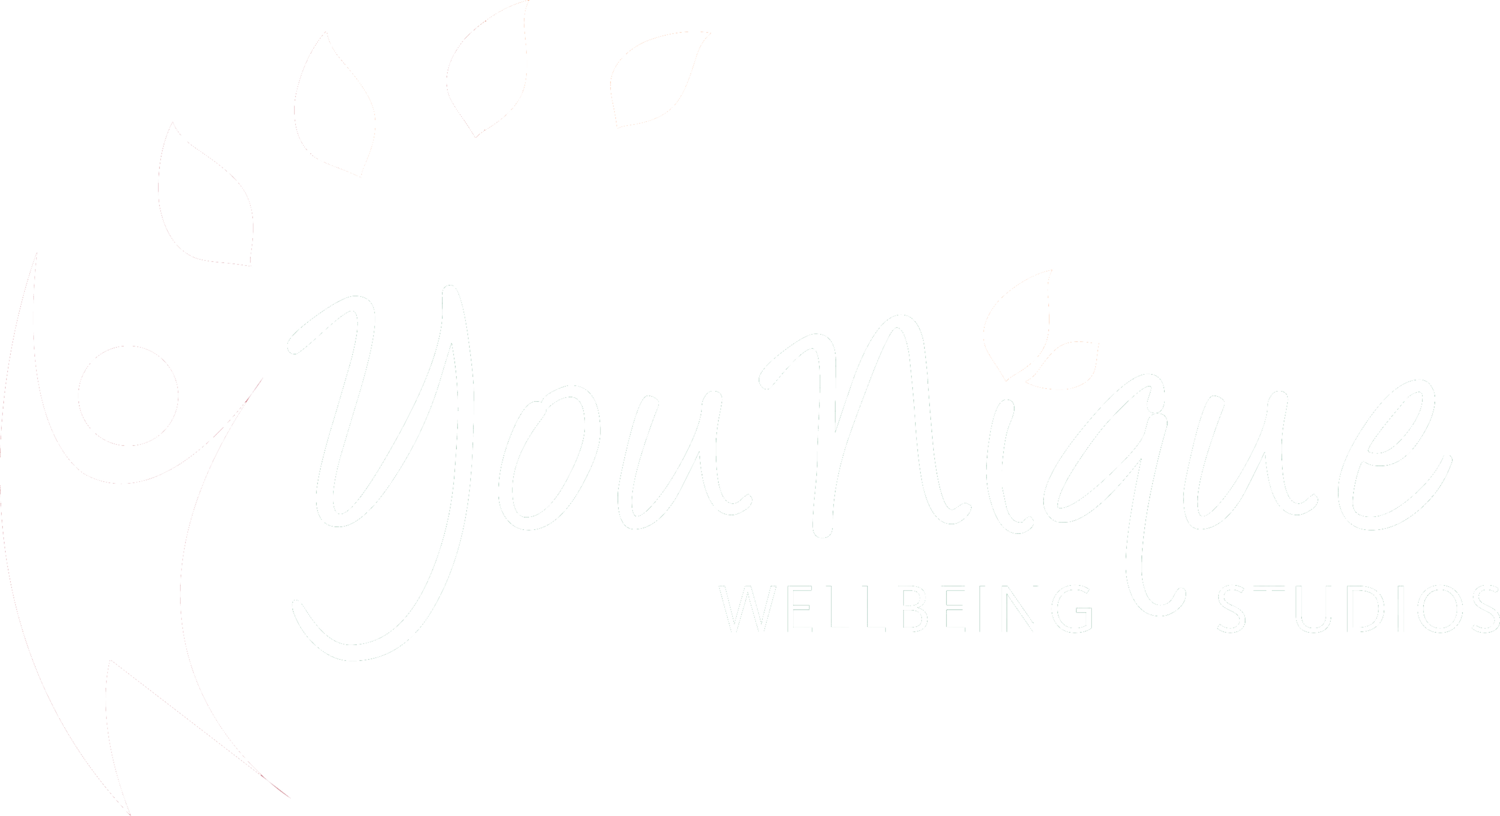 YouNique Wellbeing